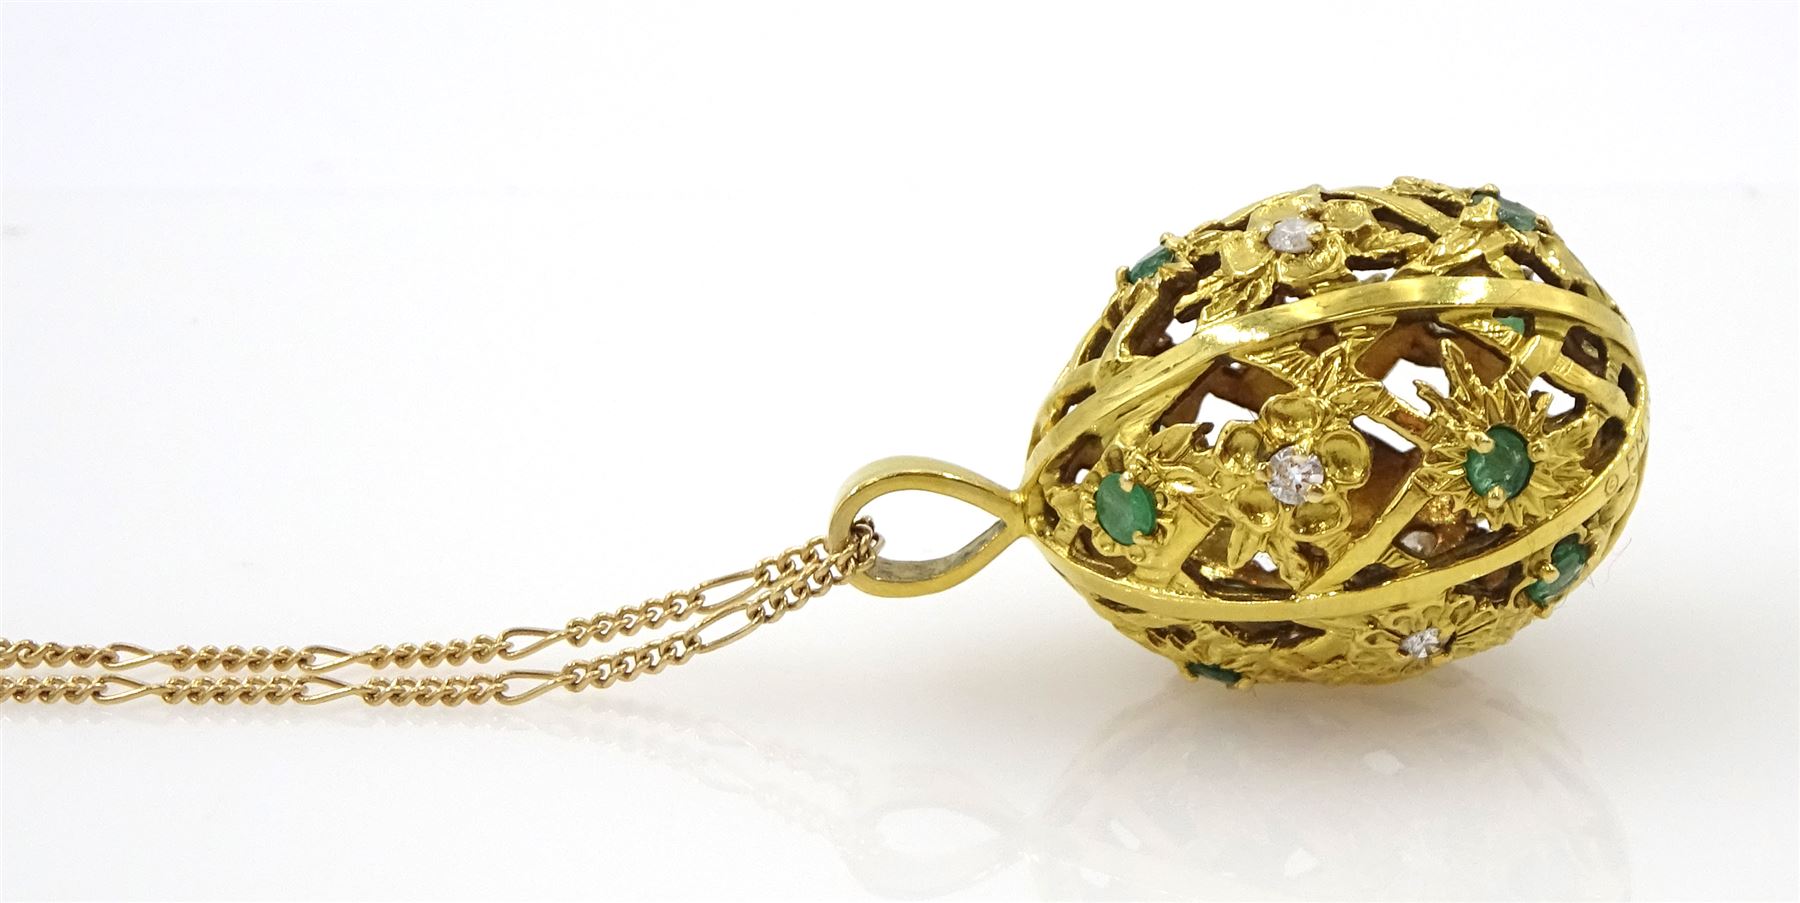 Igor Carl Faberge for Franklin Mint 14ct gold emerald and round brilliant cut diamond egg pendant - Image 3 of 6